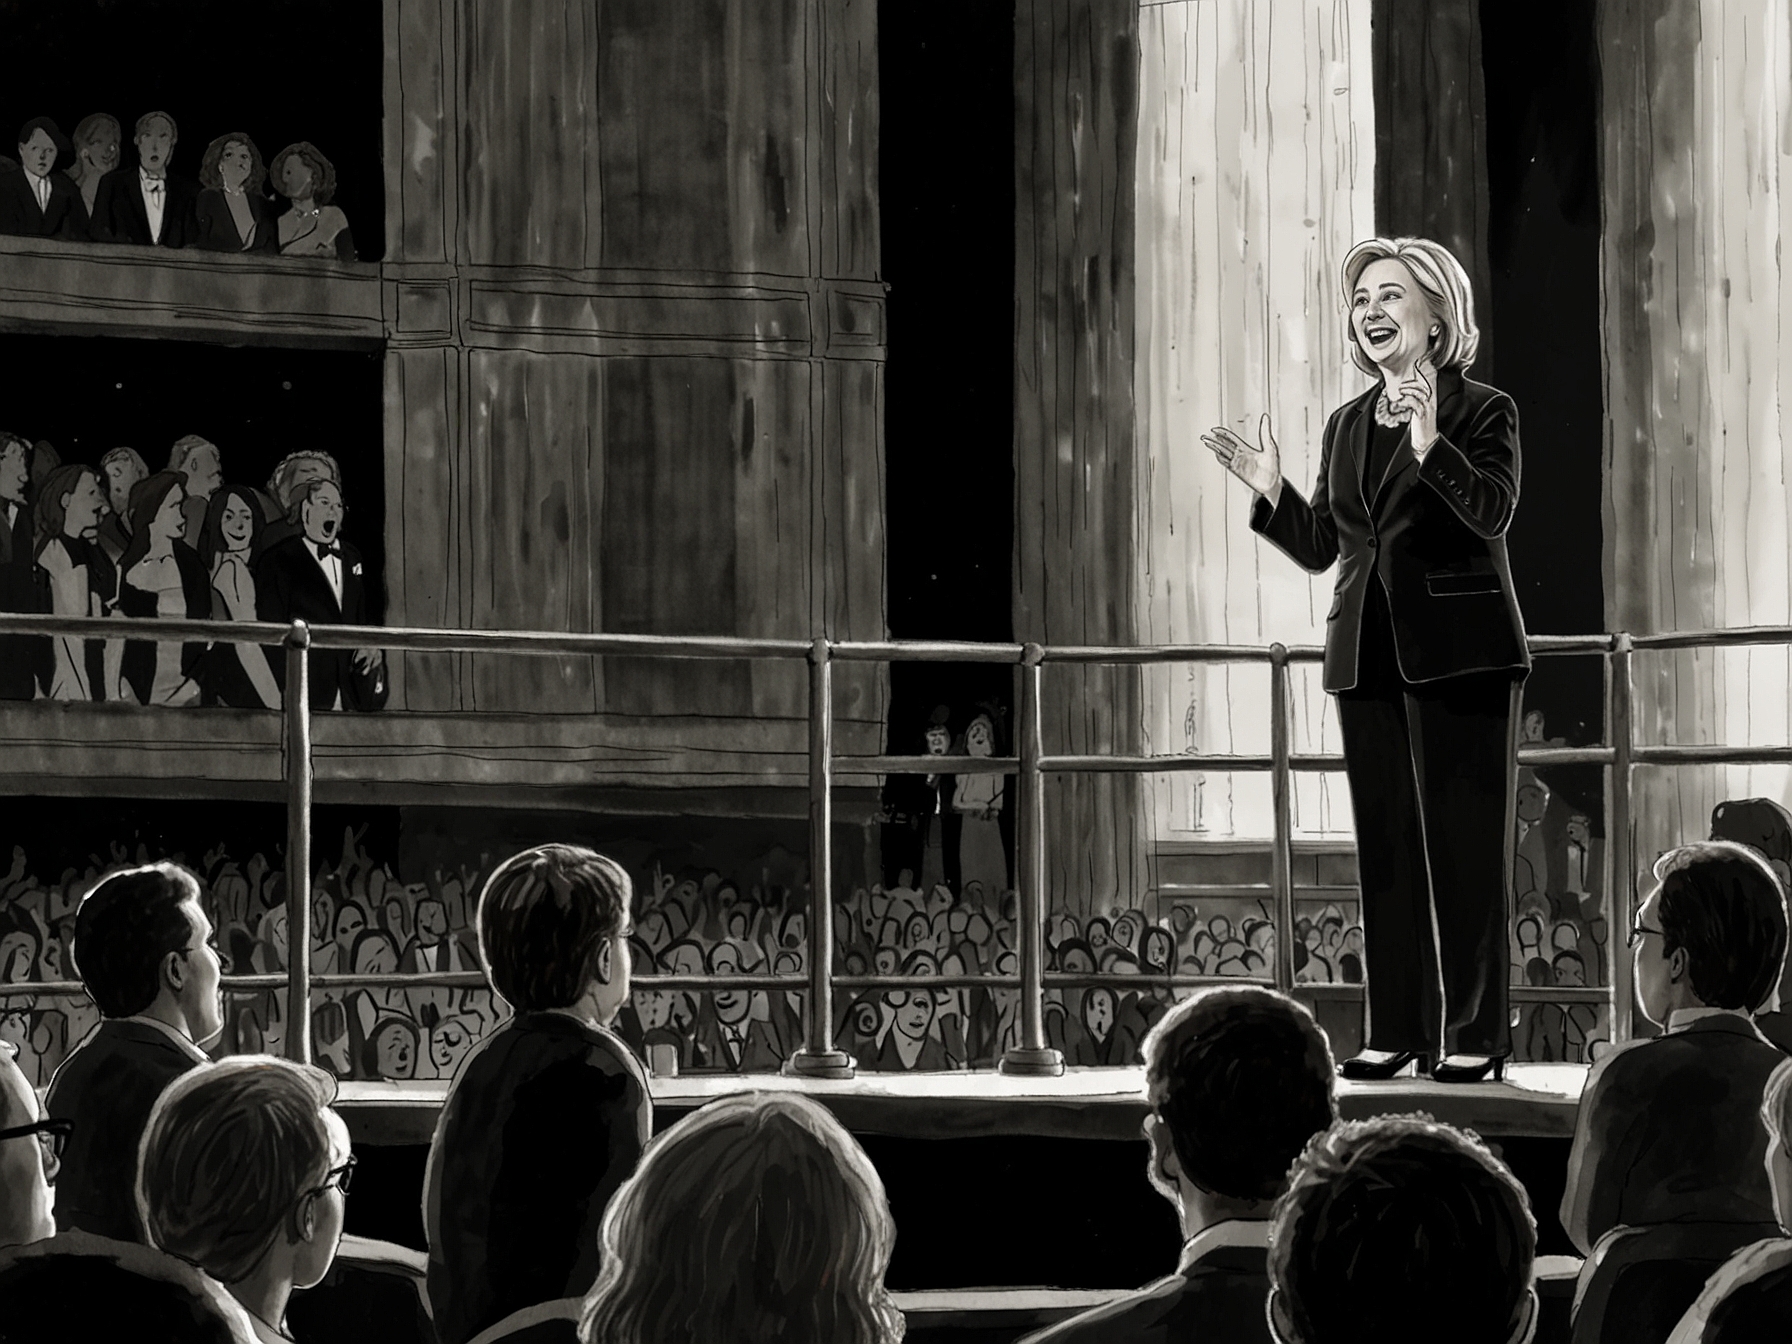 Hillary Clinton on stage at the Tony Awards receiving a standing ovation from the audience, highlighting her continued influence and the mixed reactions to her political joke.